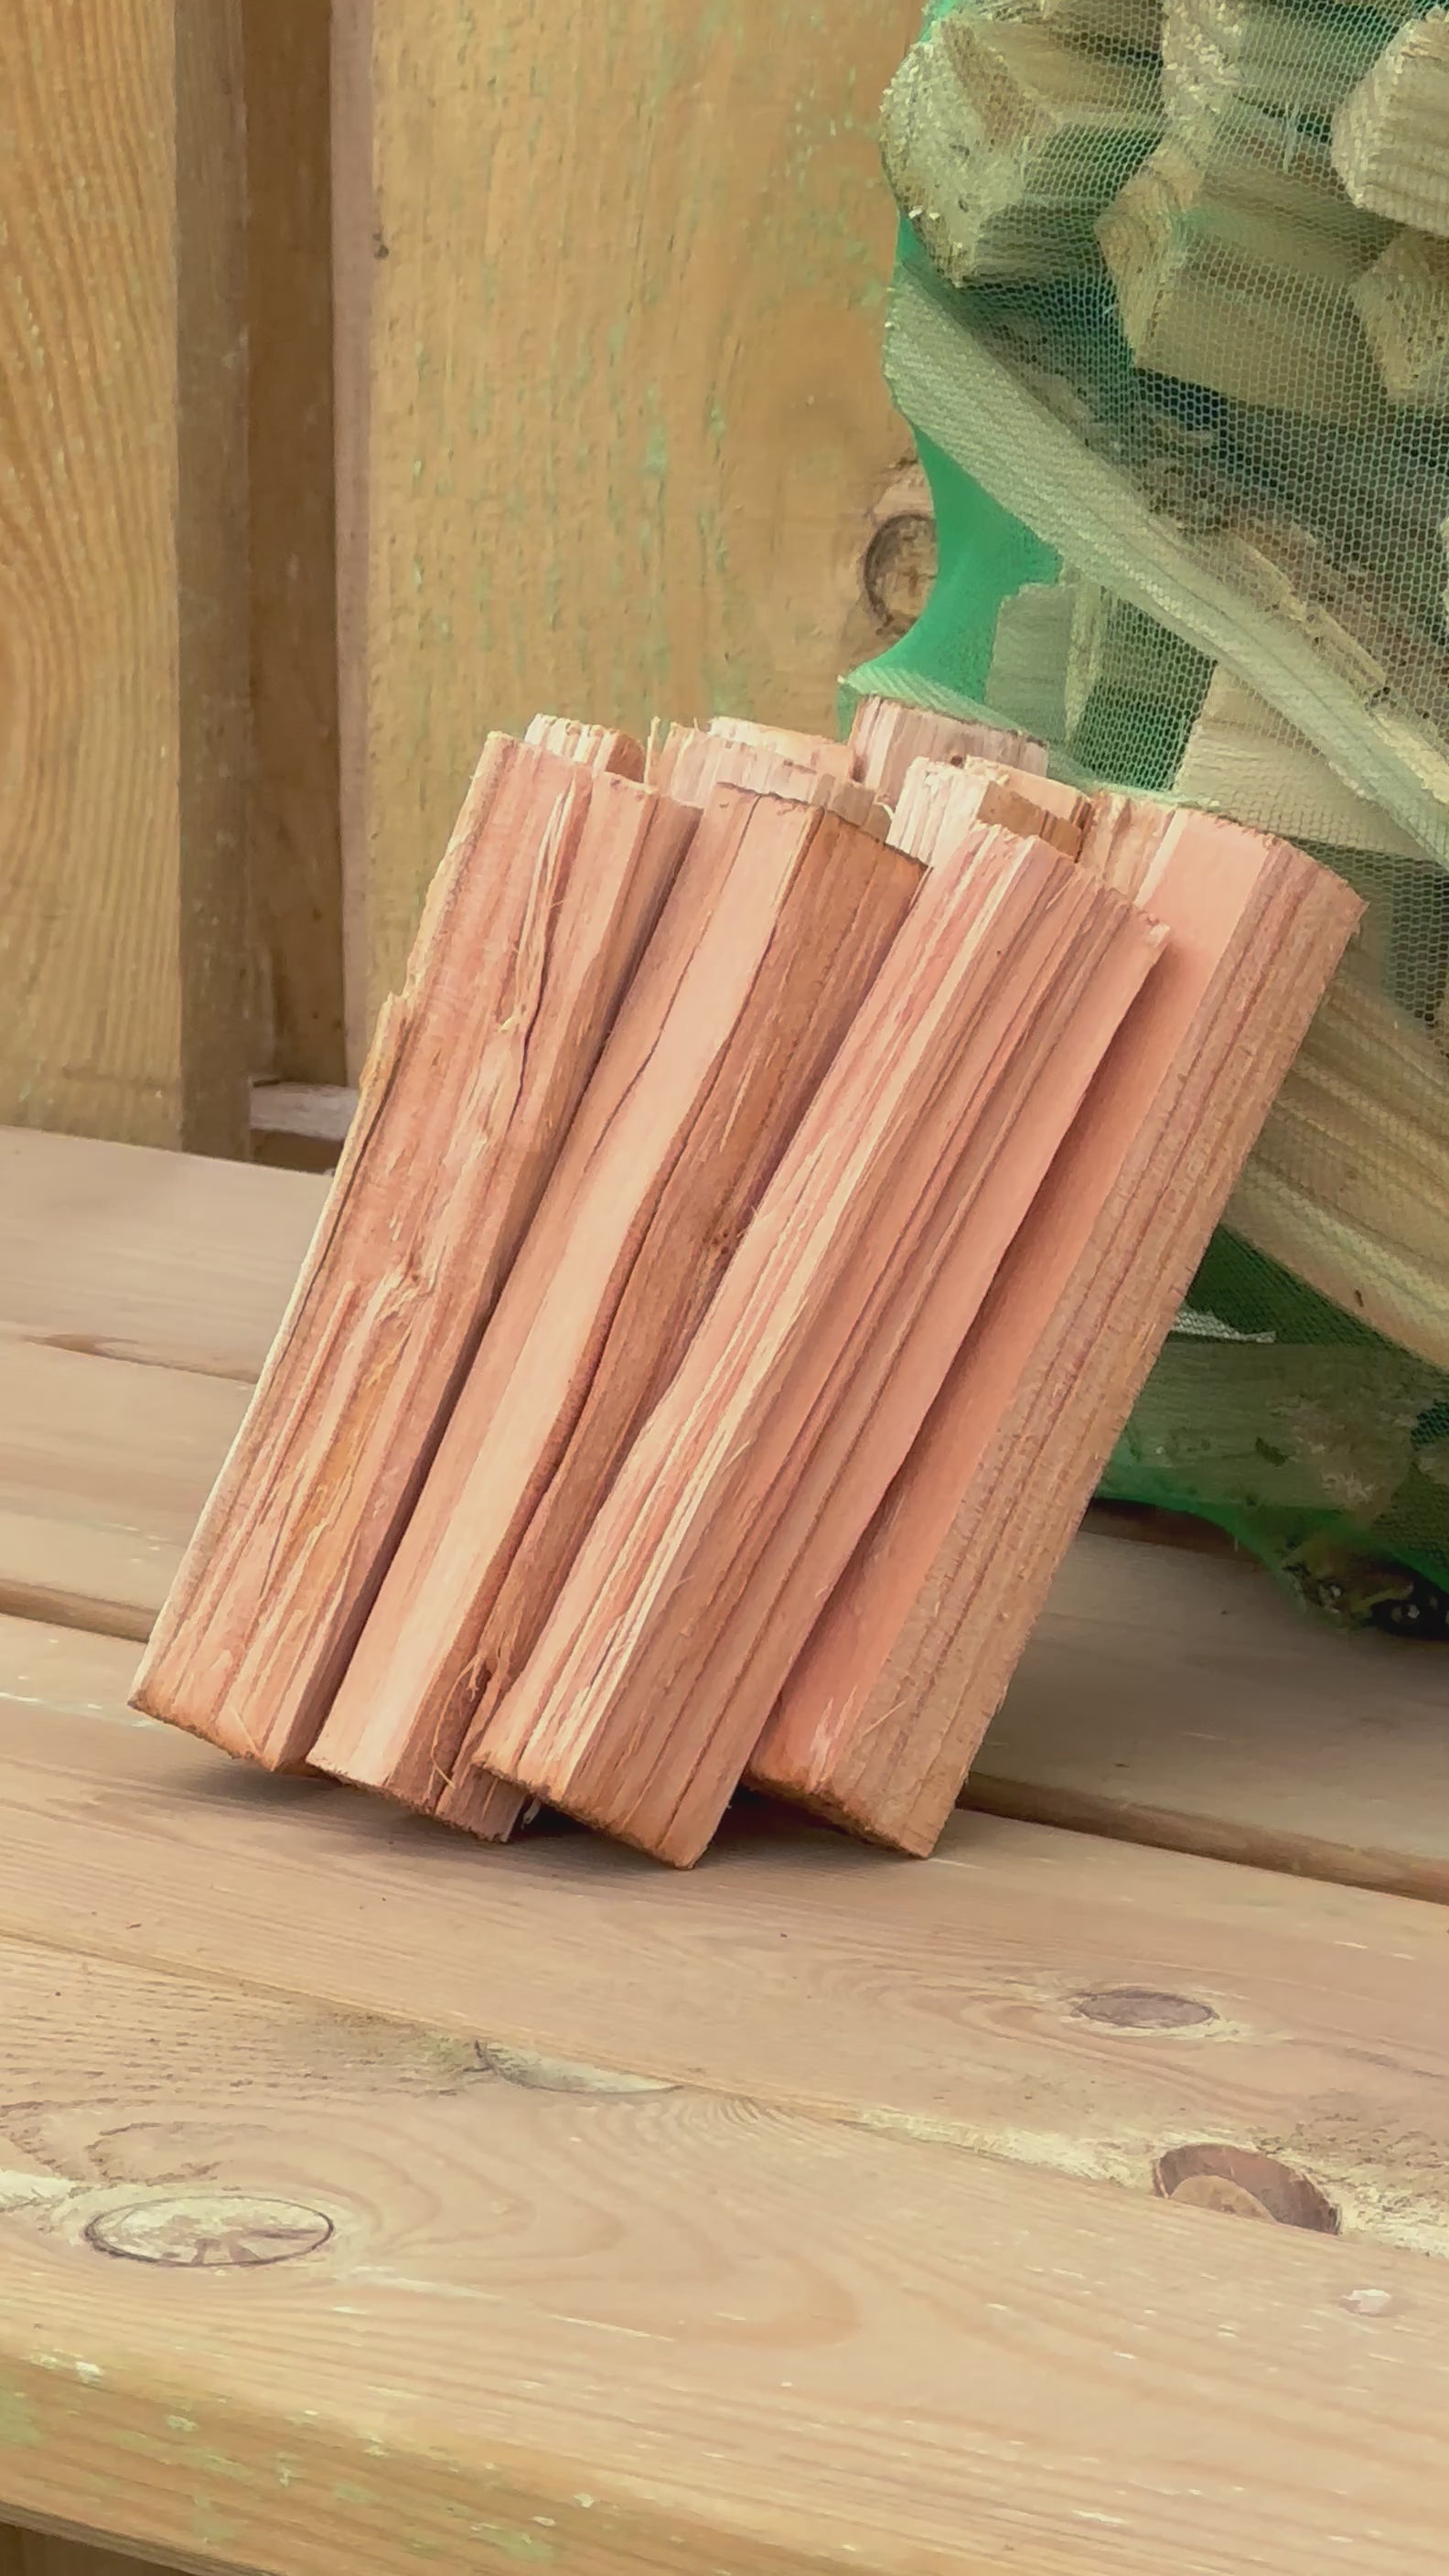 A short video clip of our dry kindling bag stacked against a wooden background.